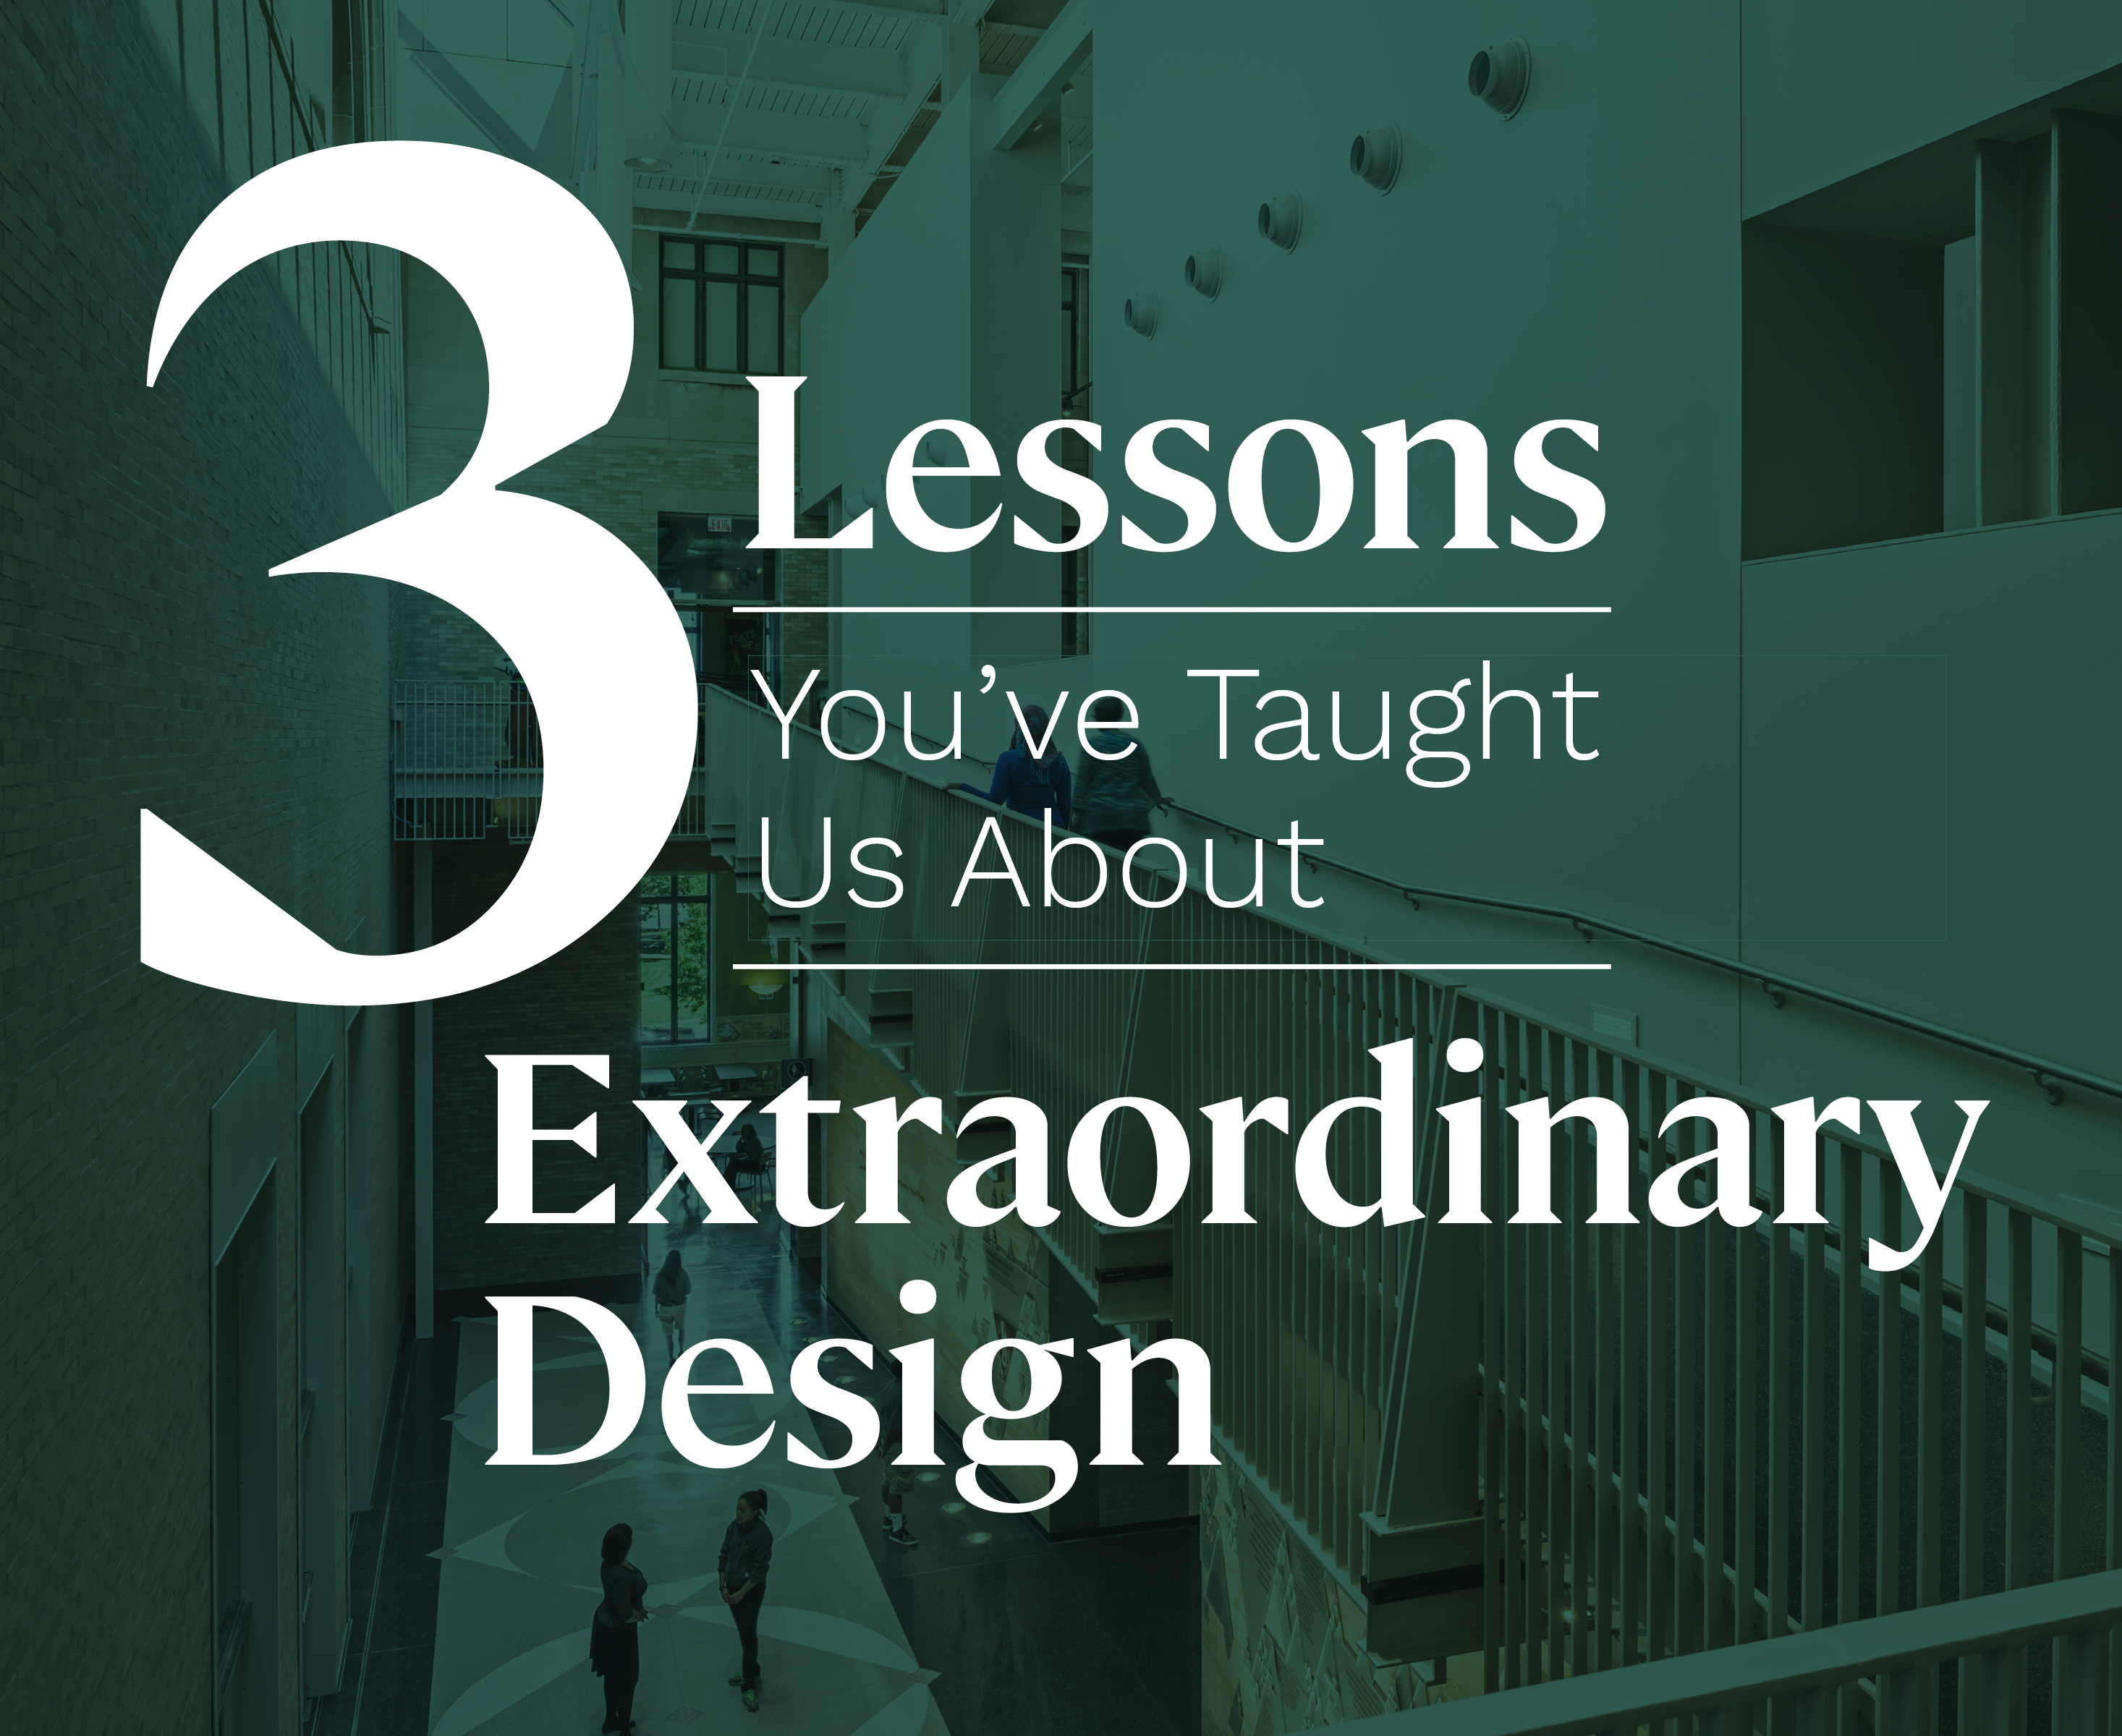 3 Lessons you've taught us about extraordinary design